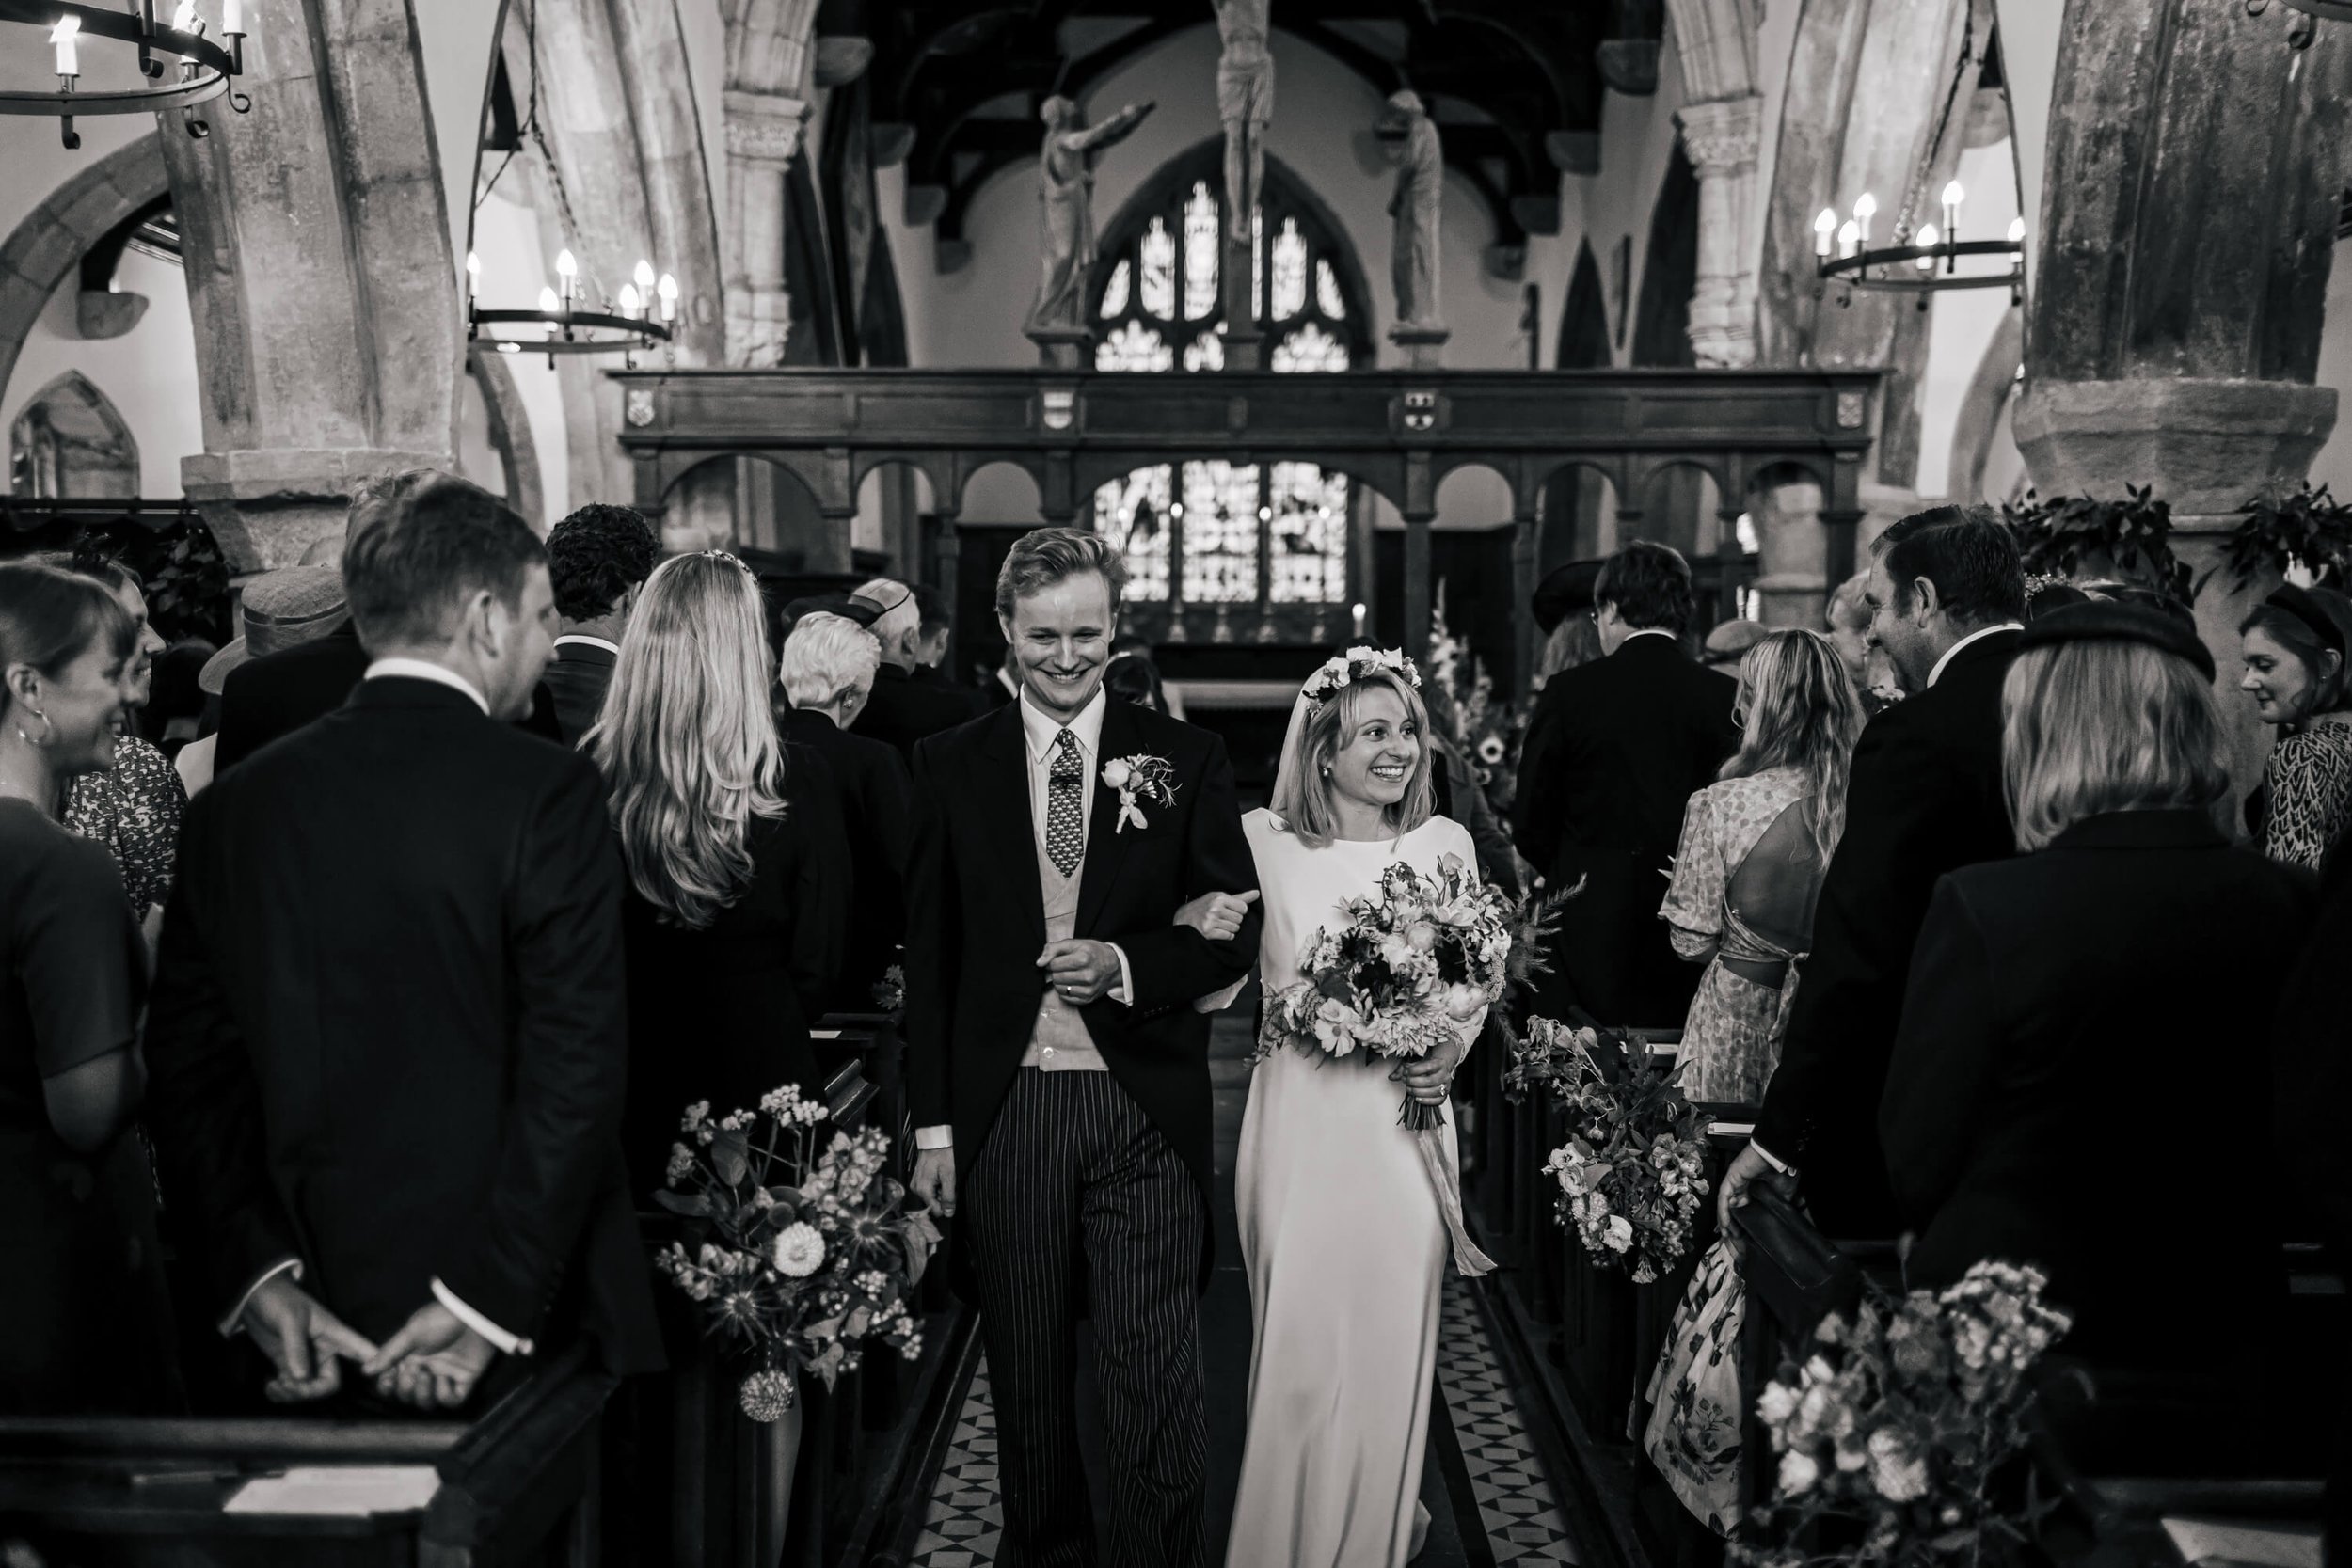 Bride and groom walking down the aisle at St Wilfrid's church in Burnsall